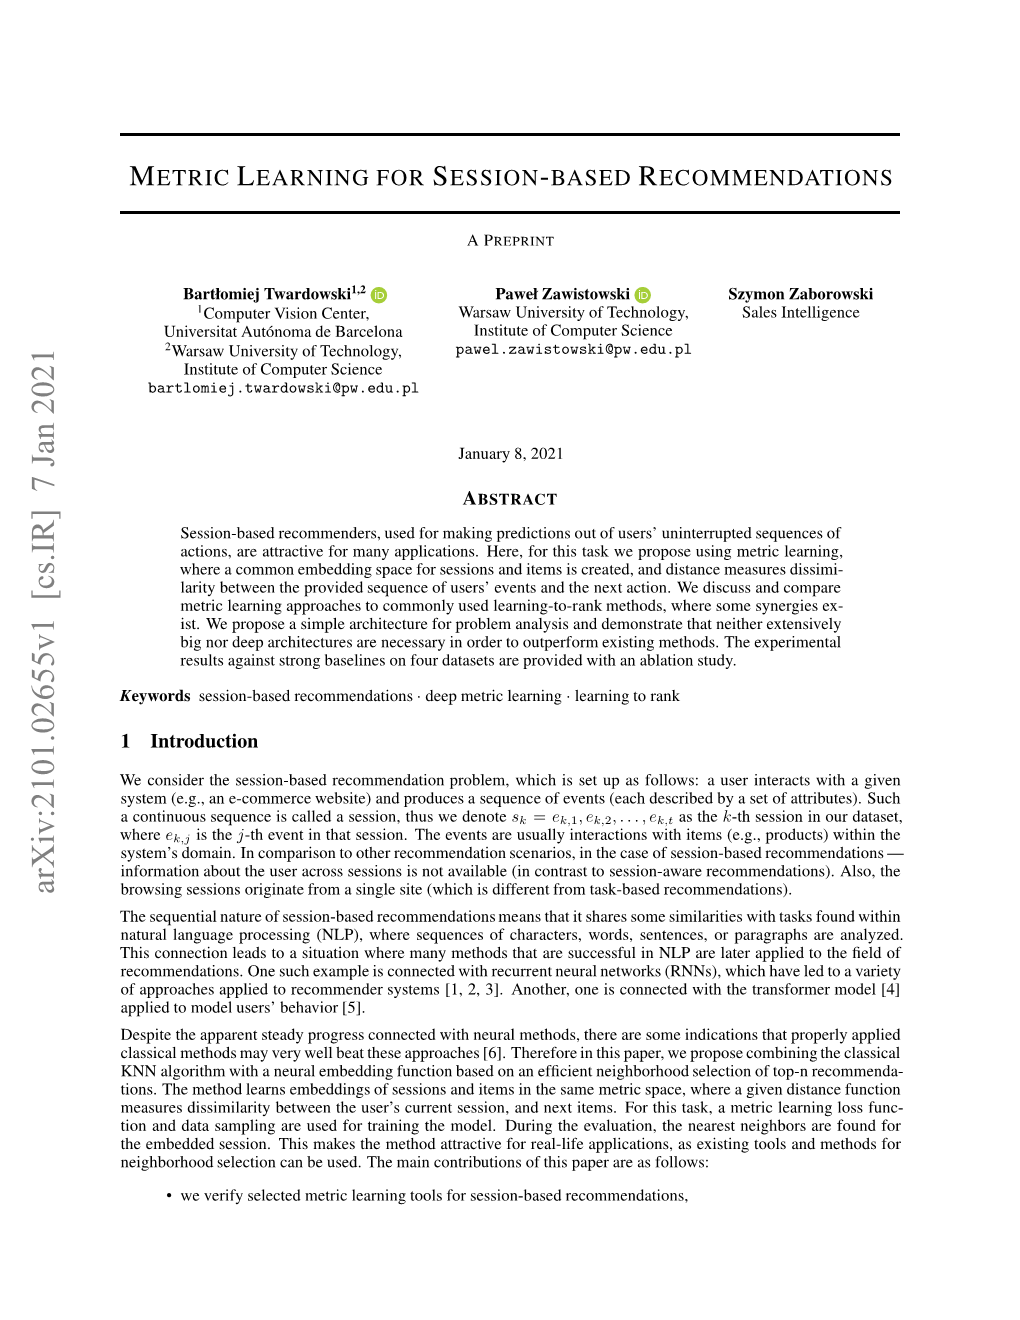 Metric Learning for Session-Based Recommendations - Preprint